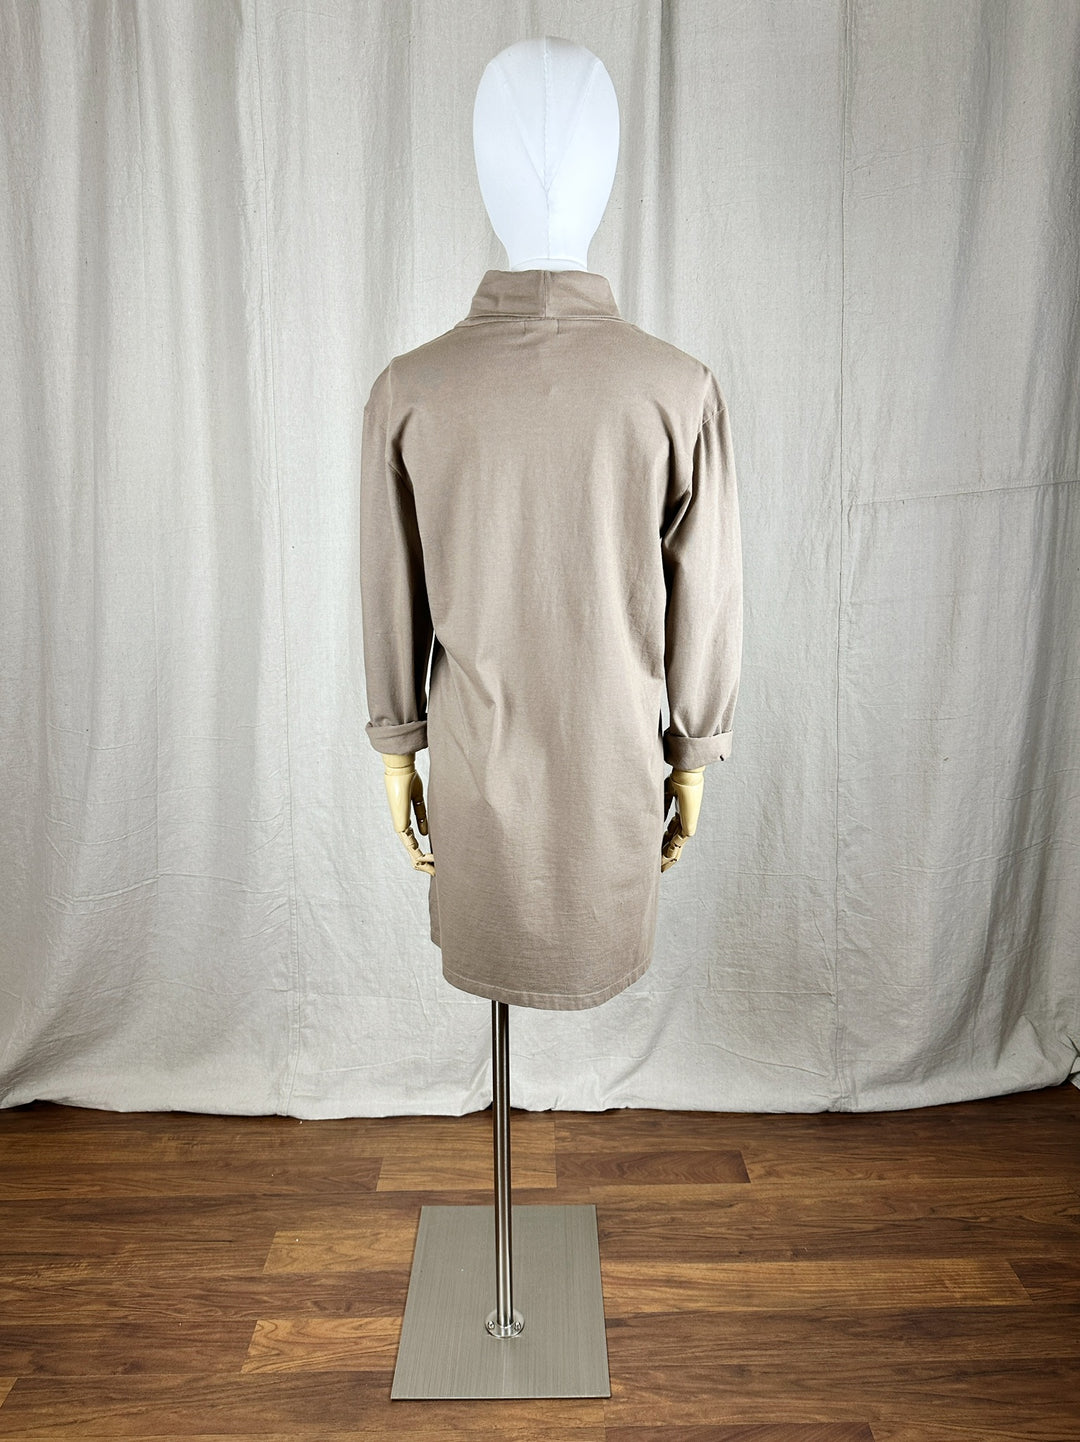 A full image of the back of the Jersey Turtleneck Dress shown on a female mannequin form